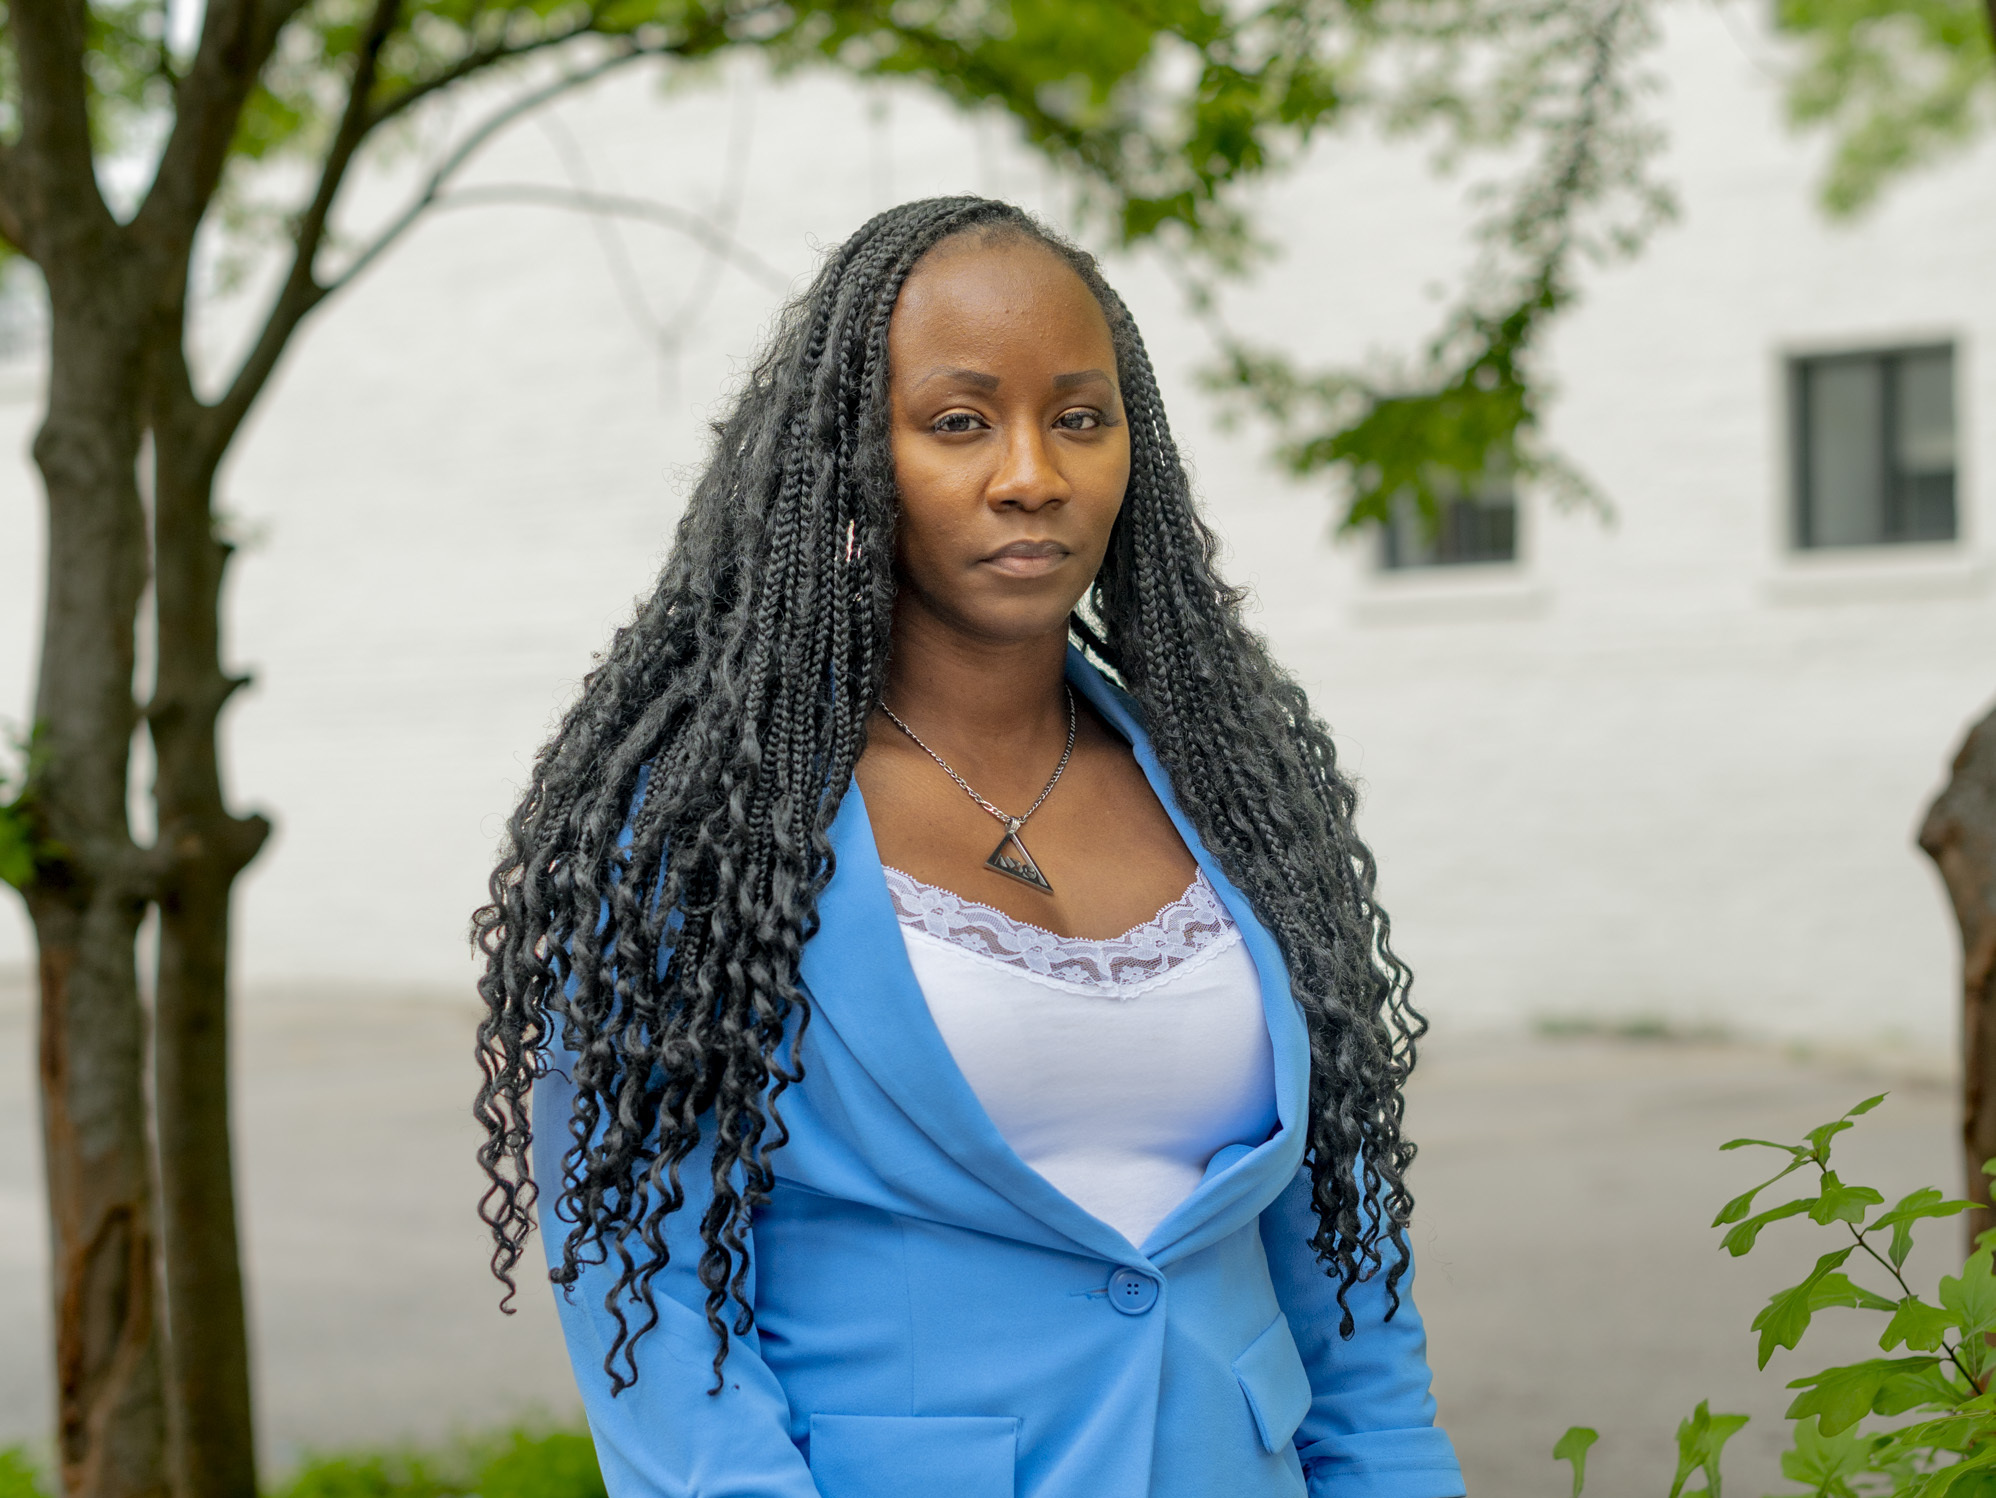 Shalela Dowdy, a plaintiff in a lawsuit challenging Alabama's Congressional districts, poses for a portrait on Government Street in Mobile, Ala., on April 1.